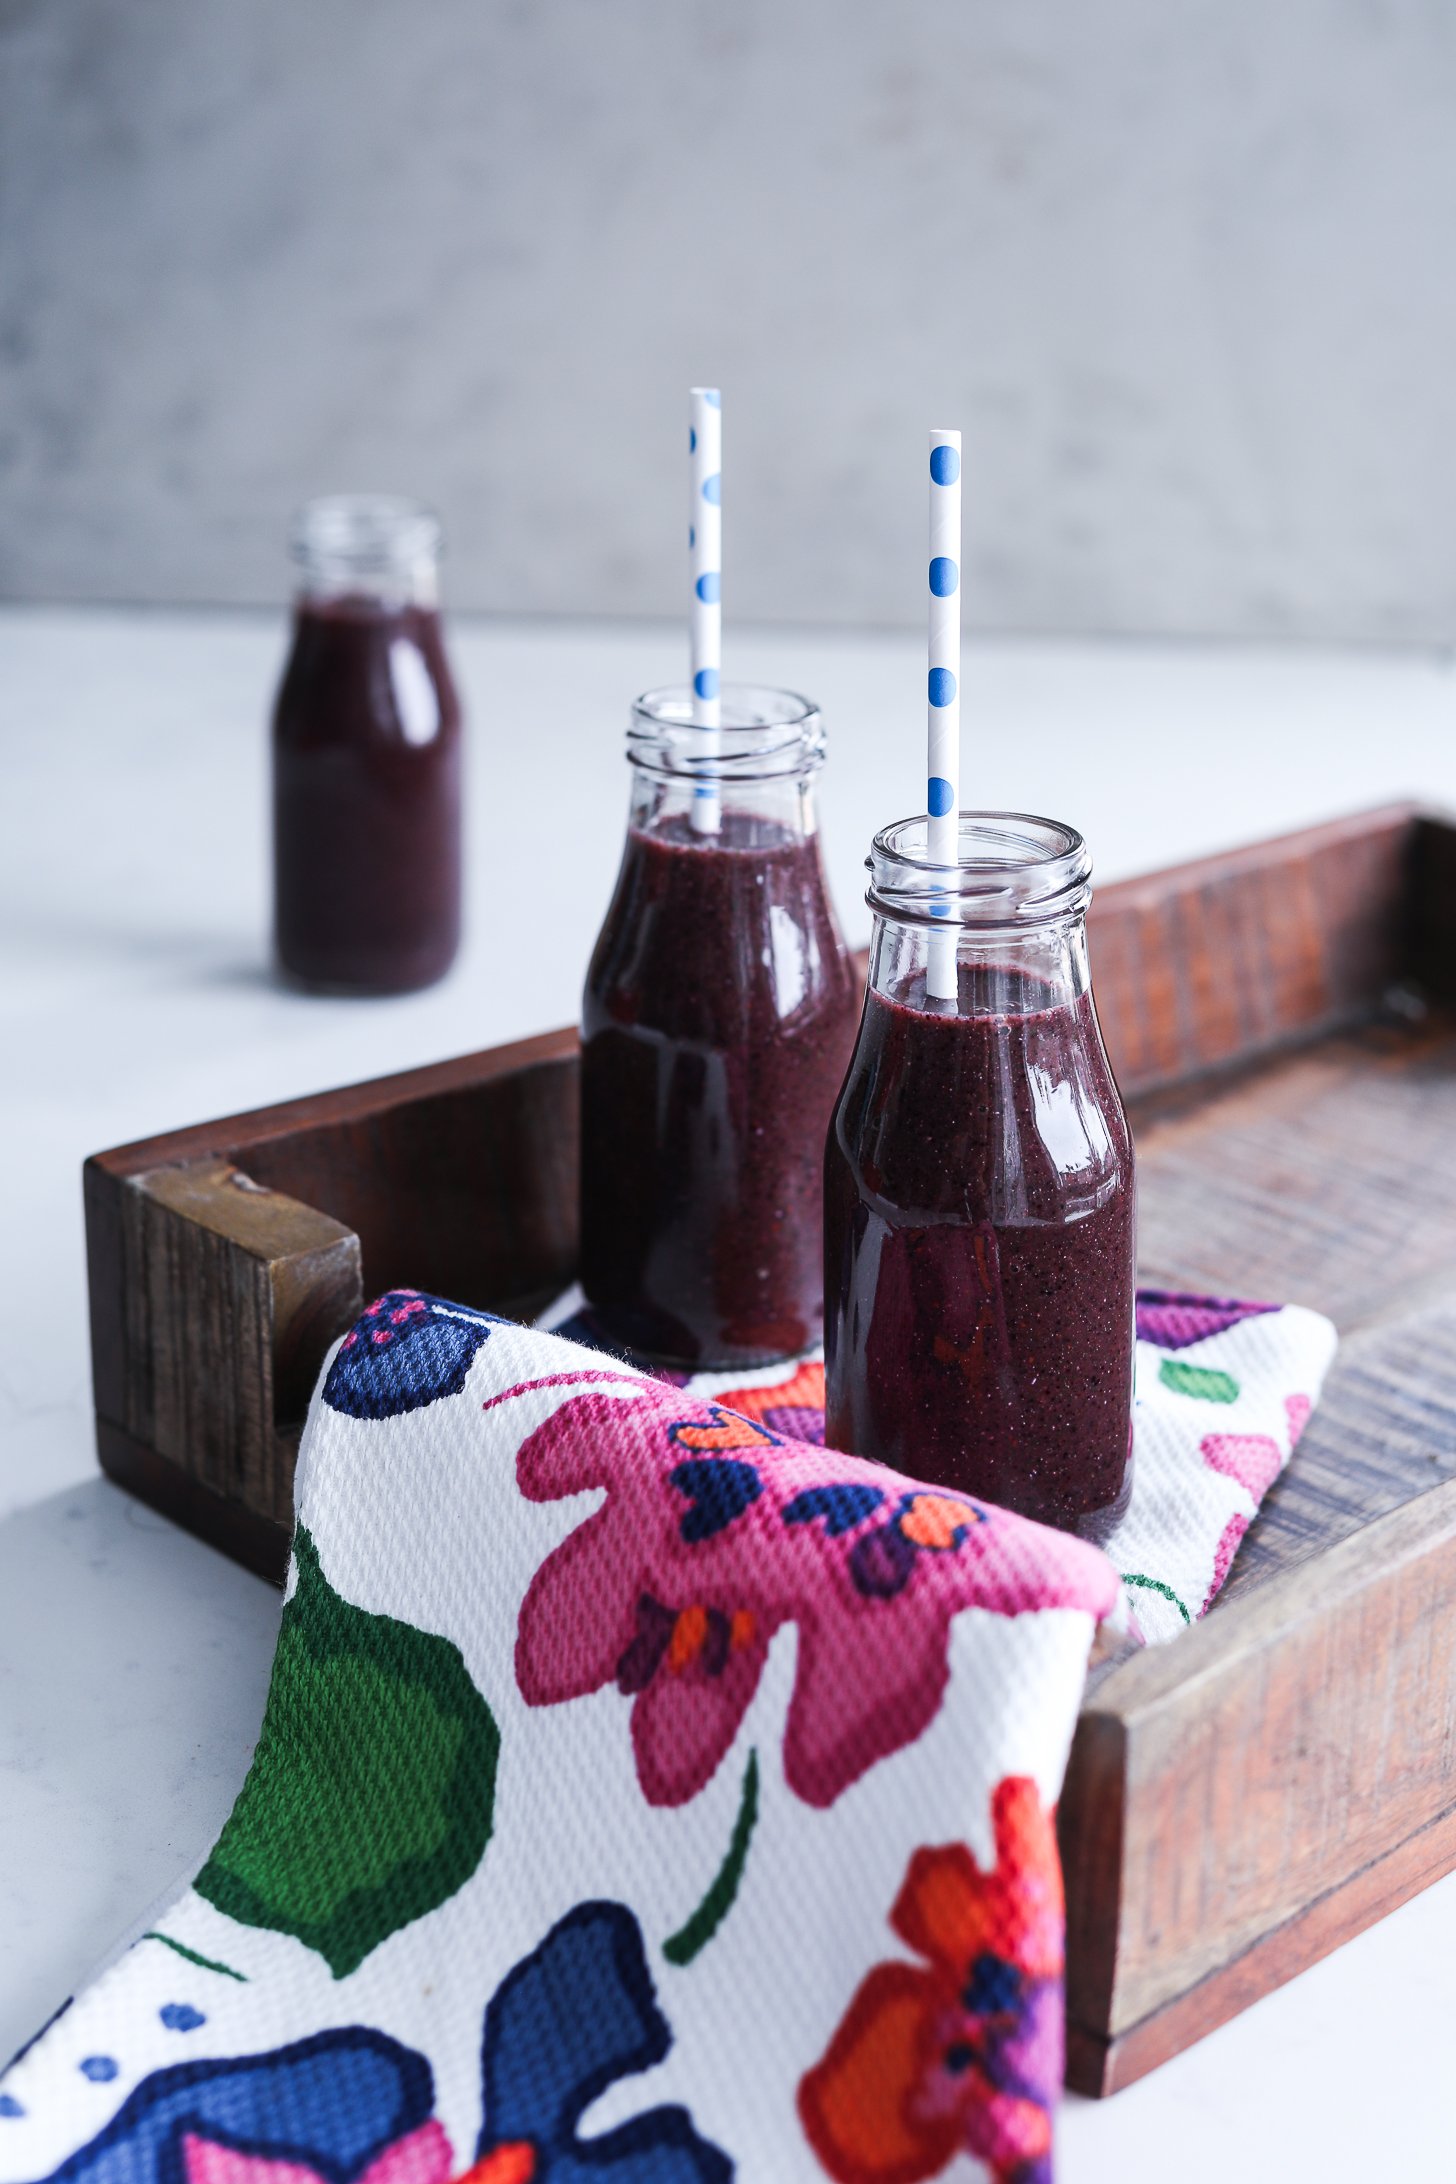 Angled perspective image of blueberry kale smoothie in small bottles with straws on a tray, covered by a cloth extending out.